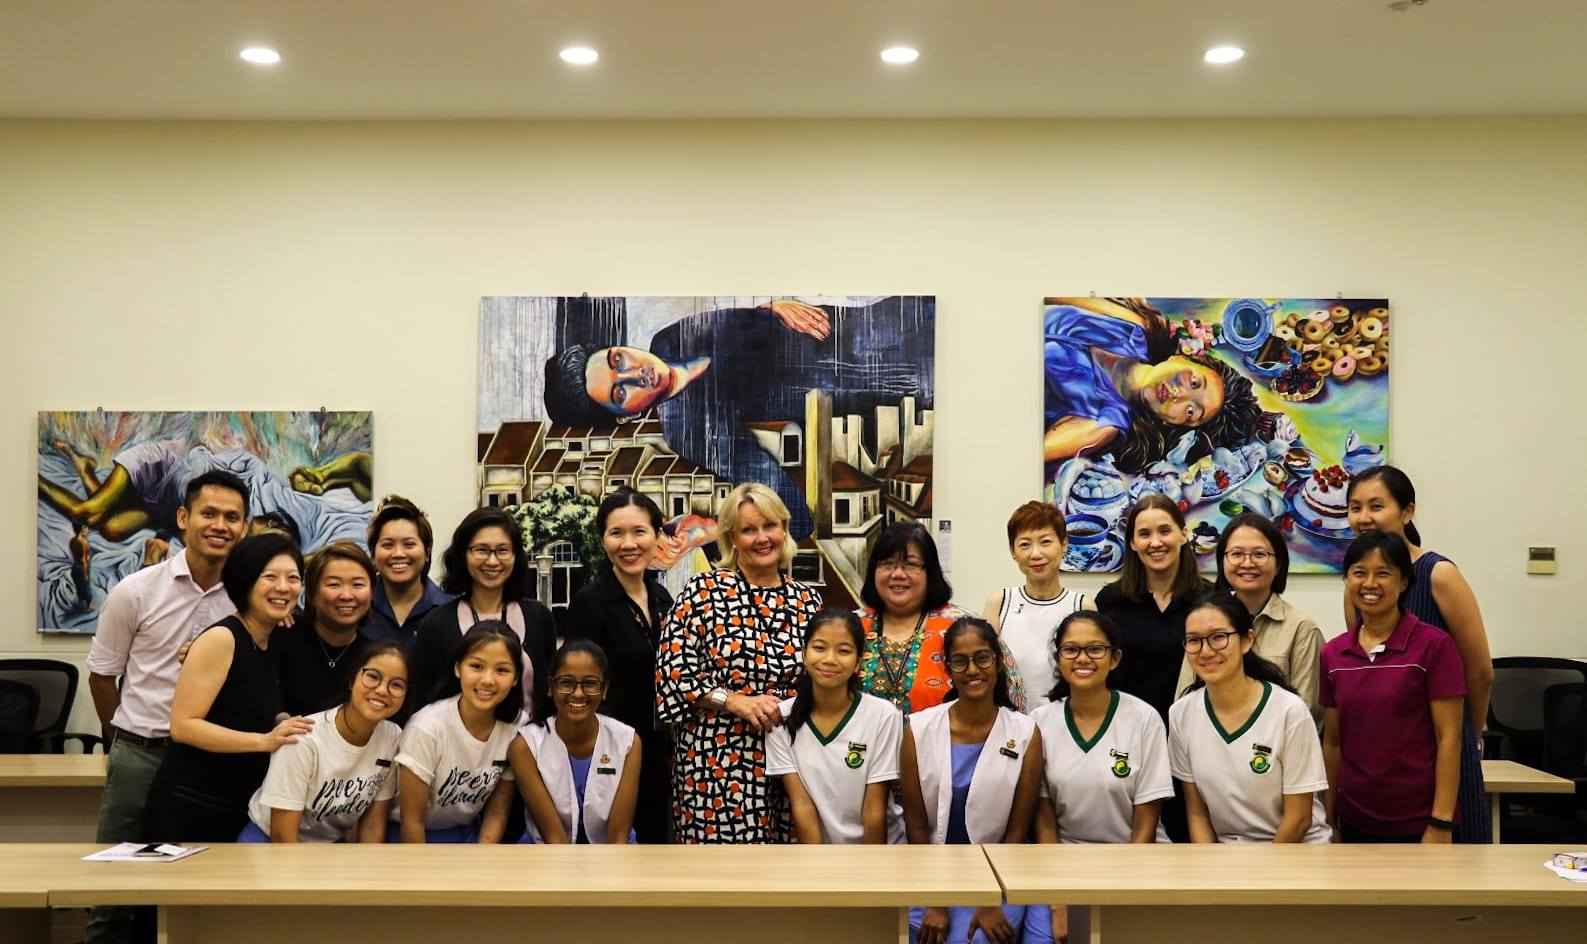 Finnish Envoy gave a talk at Singapore Chinese Girls’ School